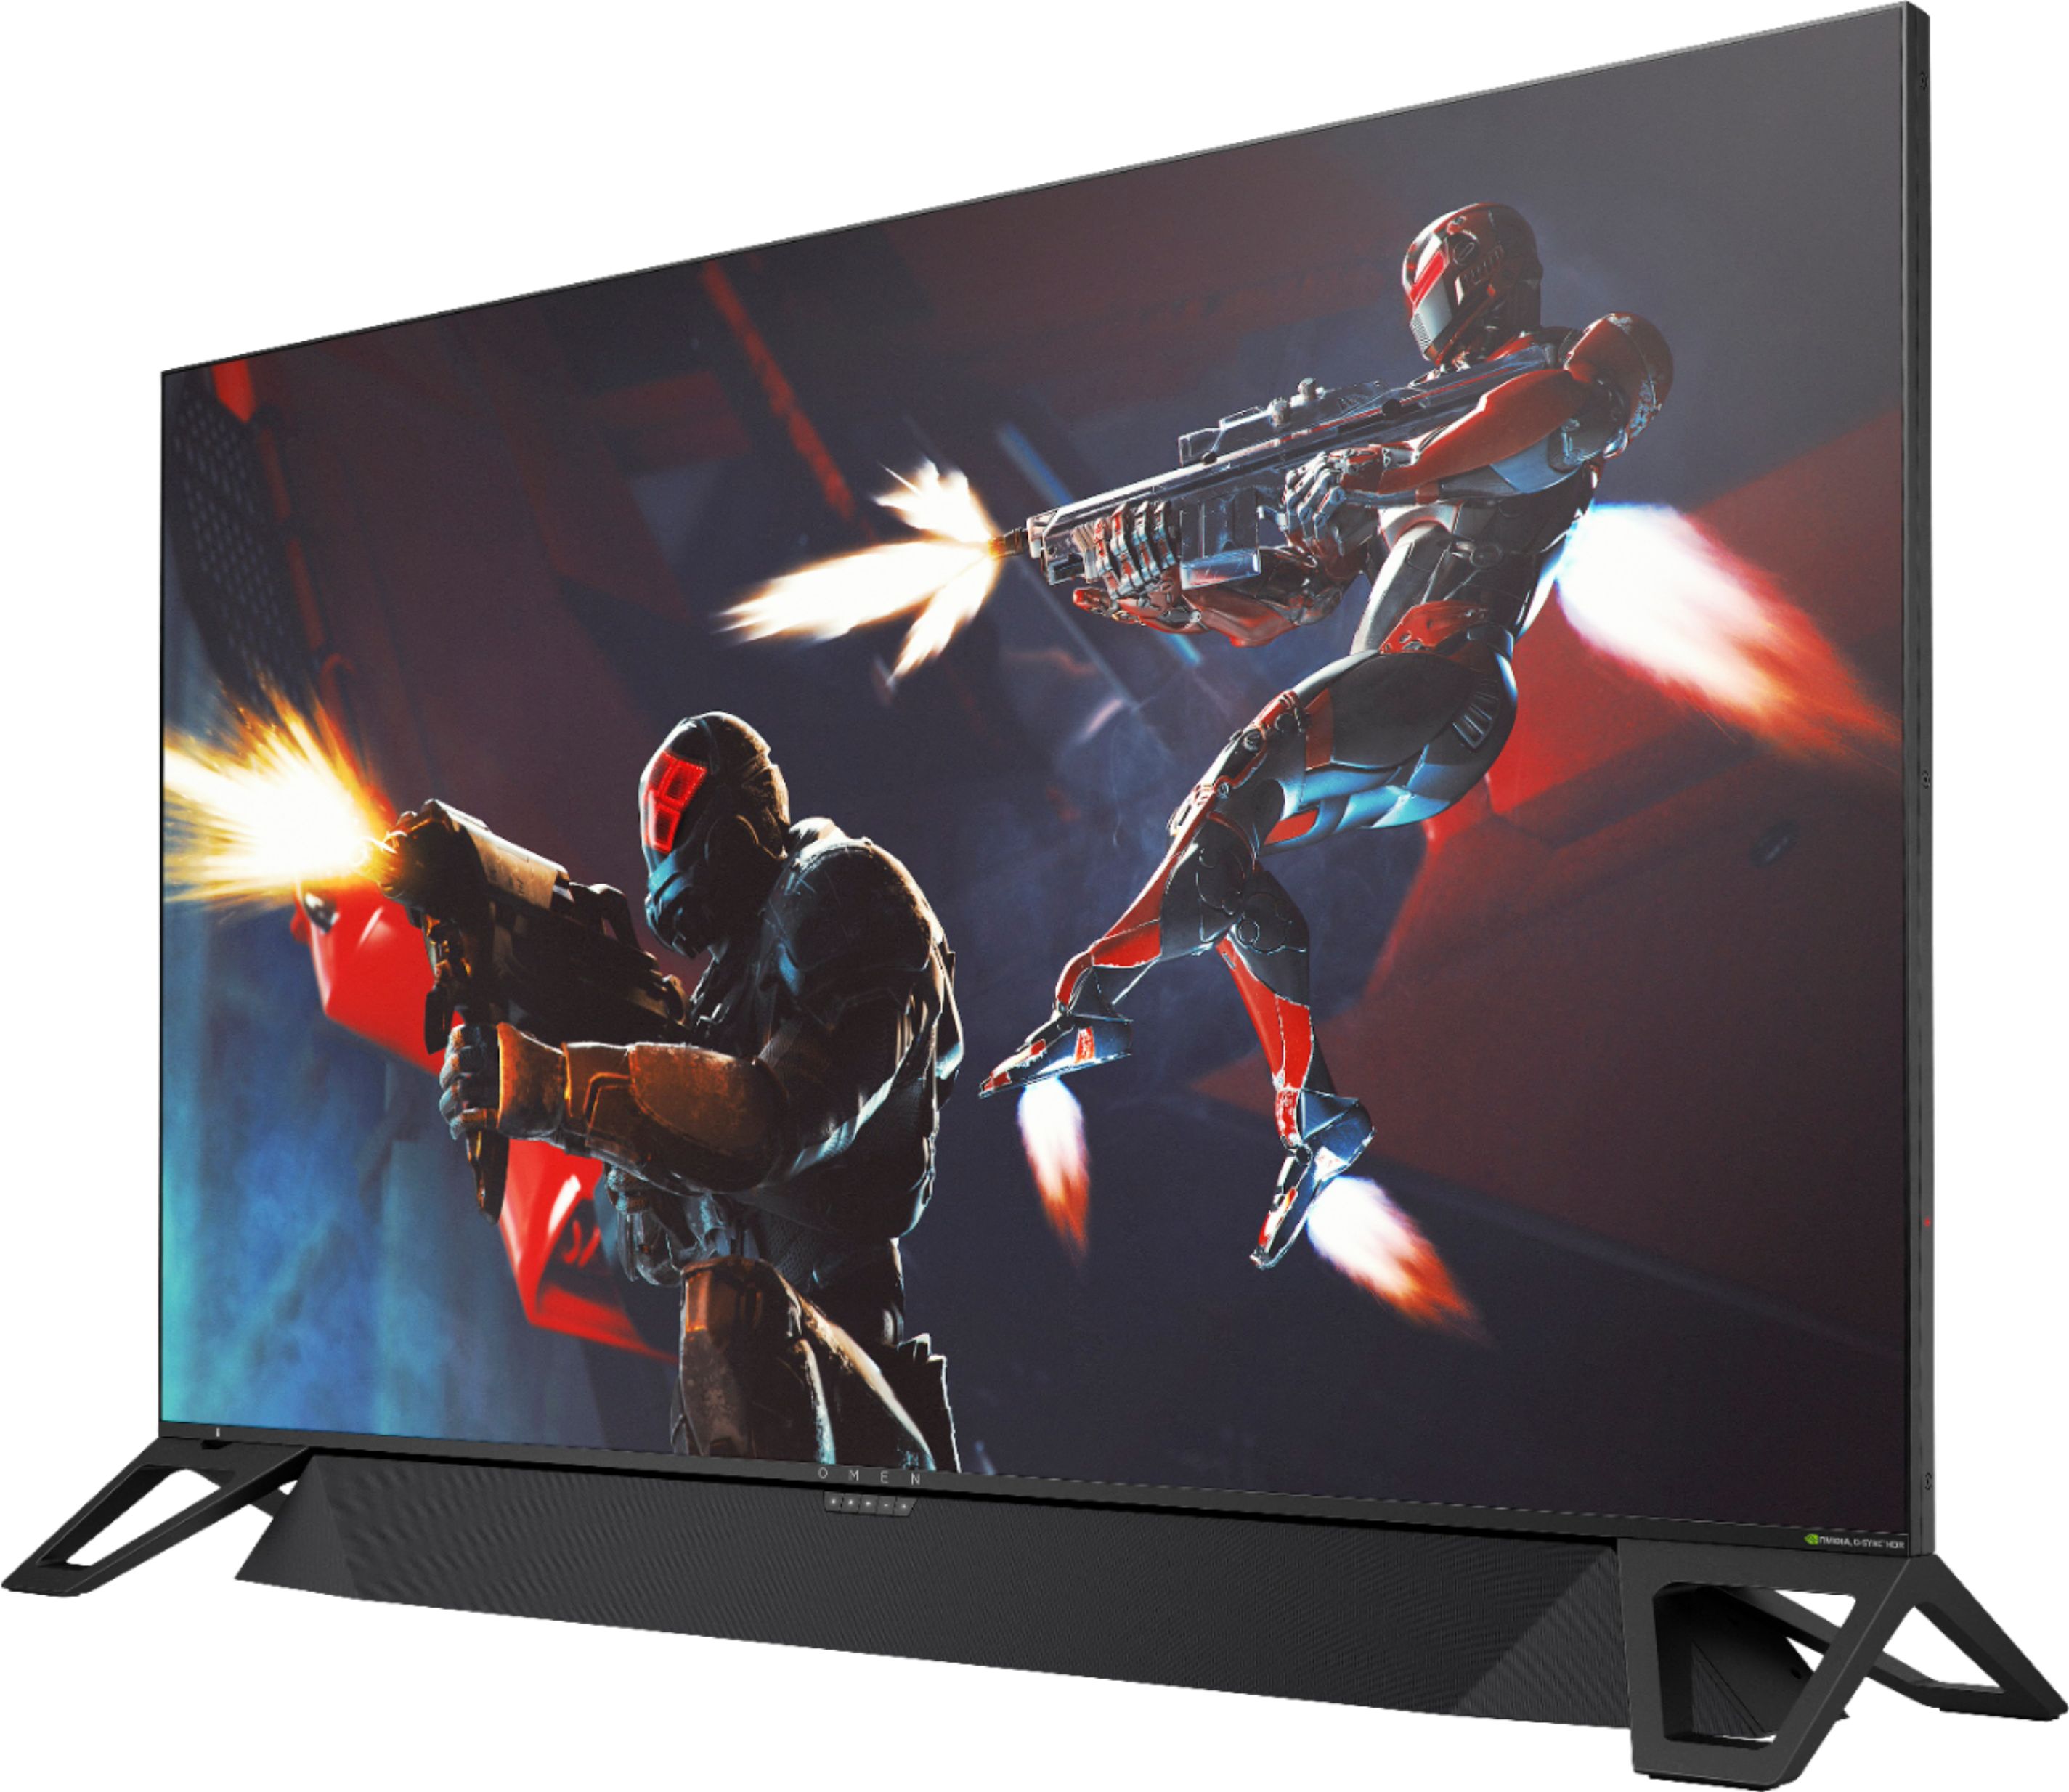 Left View: HP OMEN - Emperium 65" LED 4K UHD G-SYNC Ultimate Monitor with HDR (DisplayPort, HDMI, USB) - Black/Green